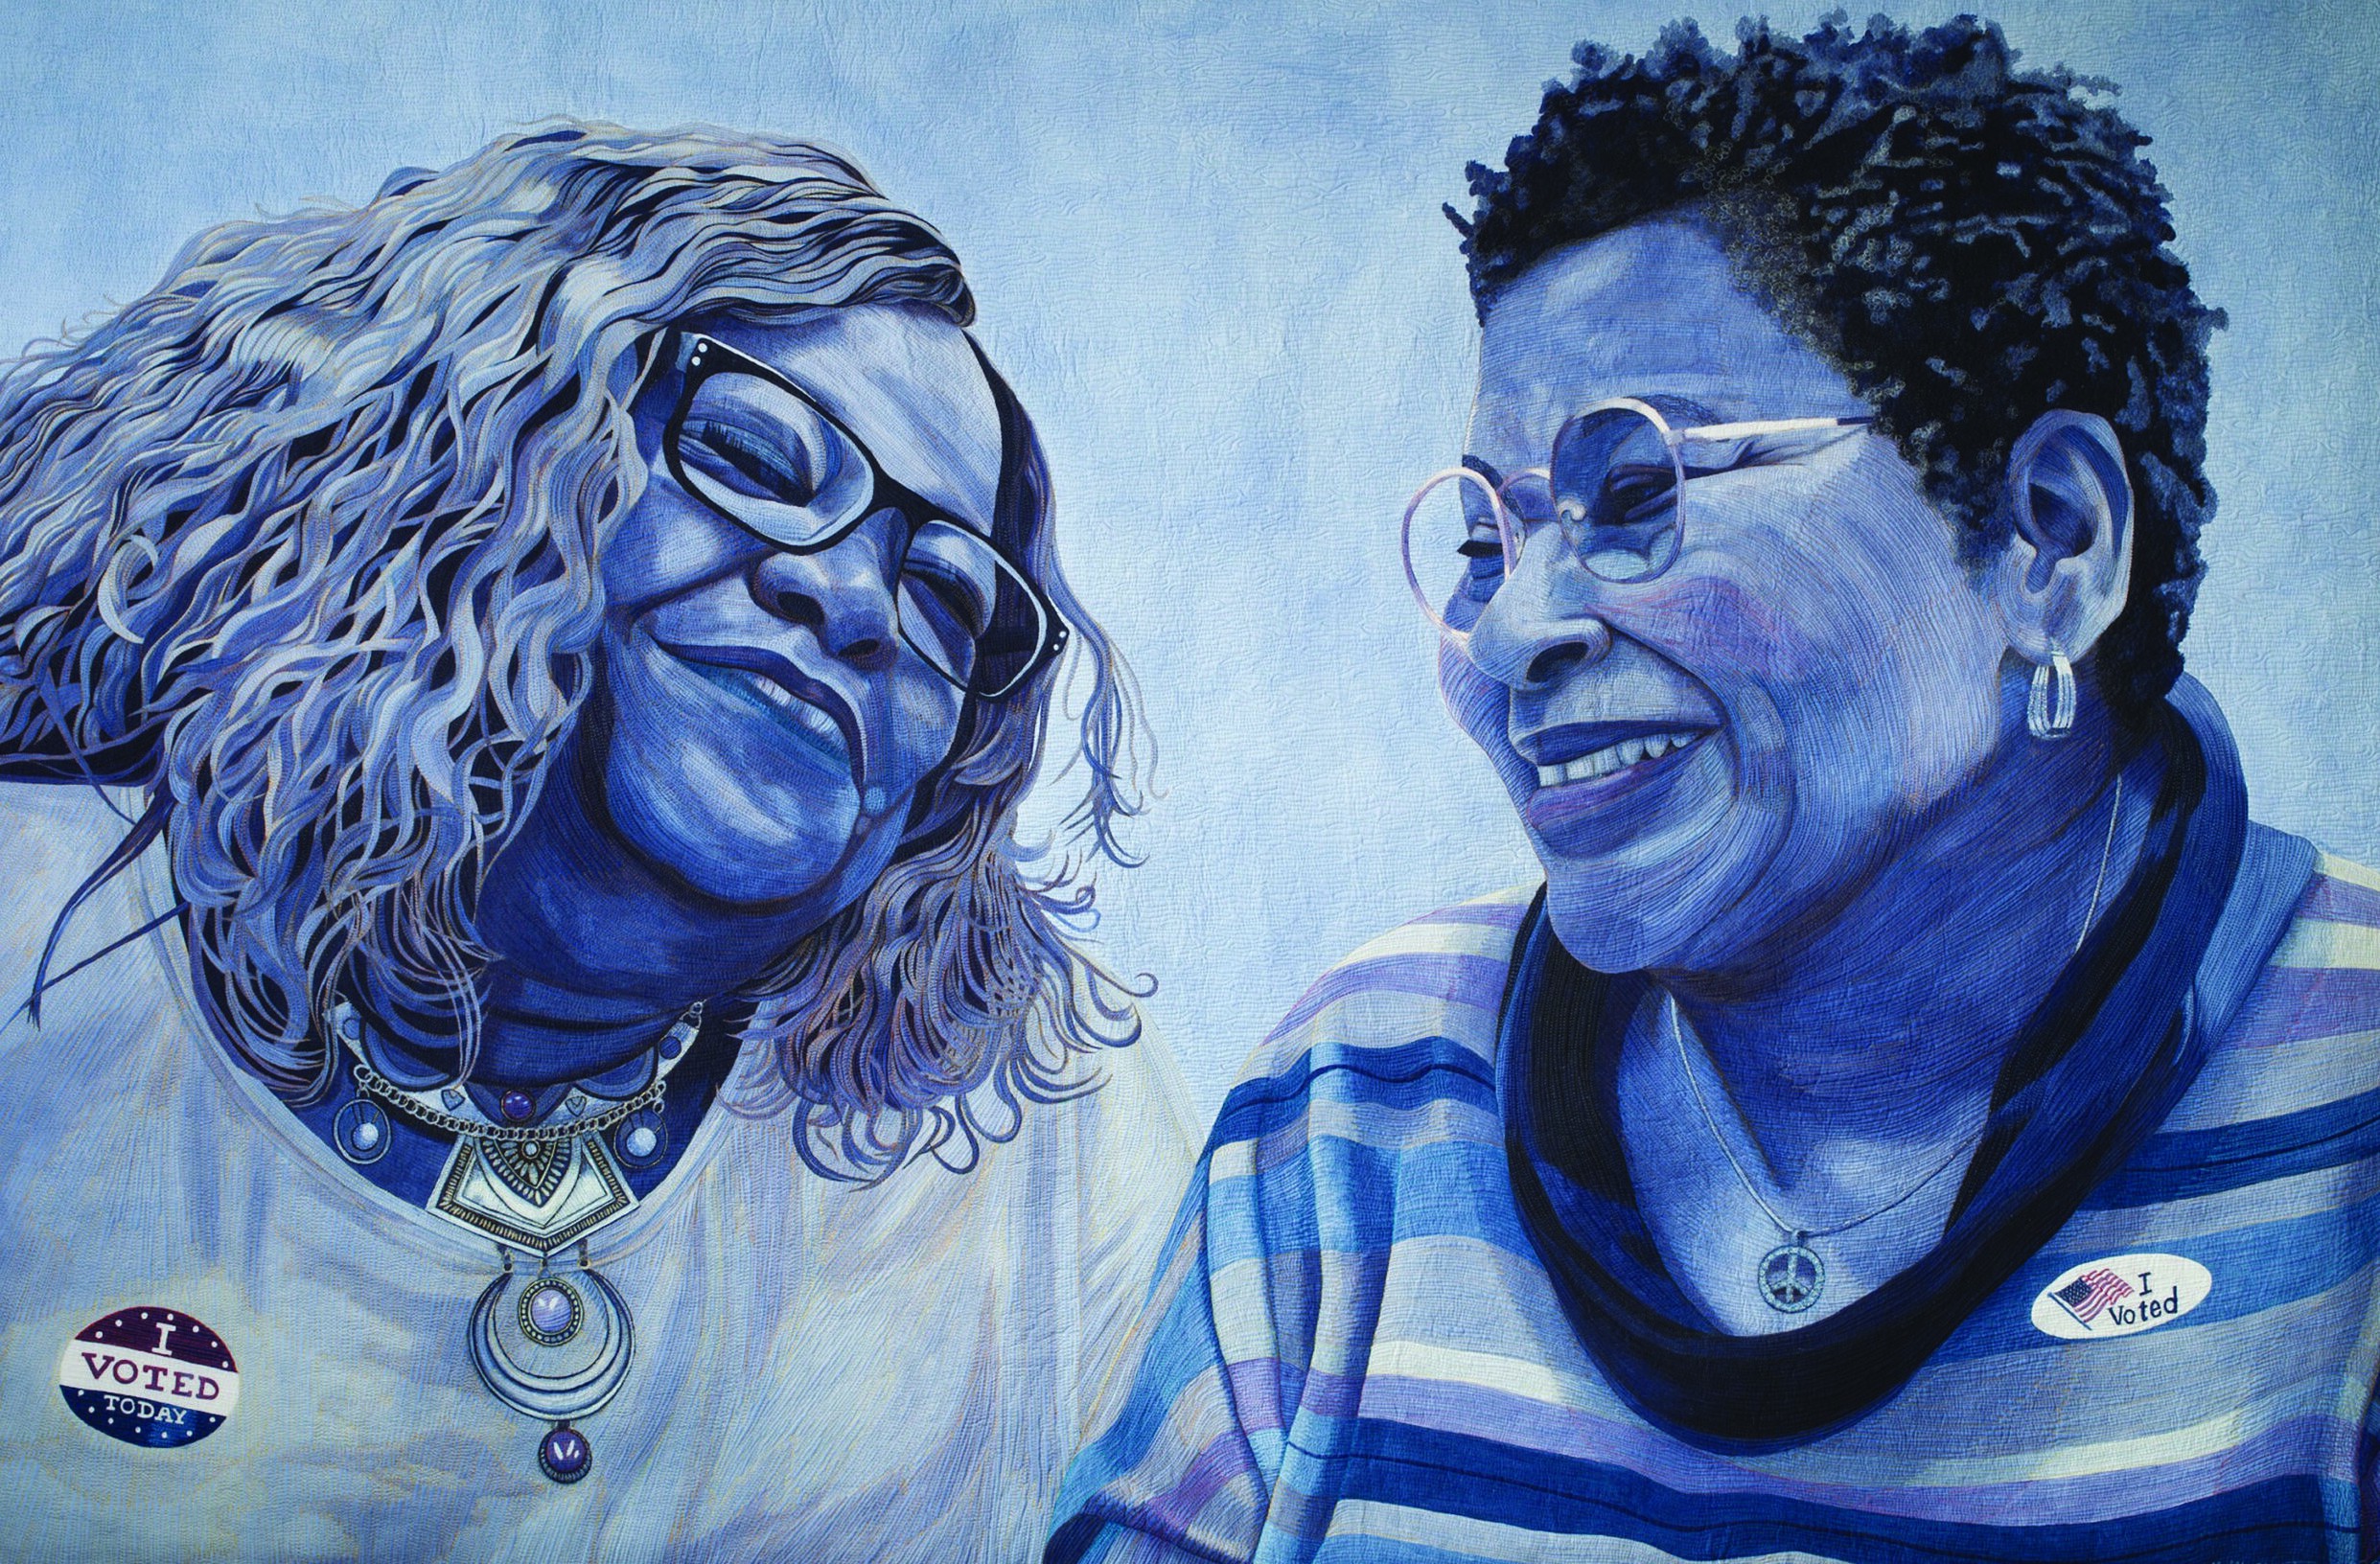 A quilted artwork, painted in shades of blue, depicting two Black women smiling at each other. Both women are wearing 'I Voted' stickers.